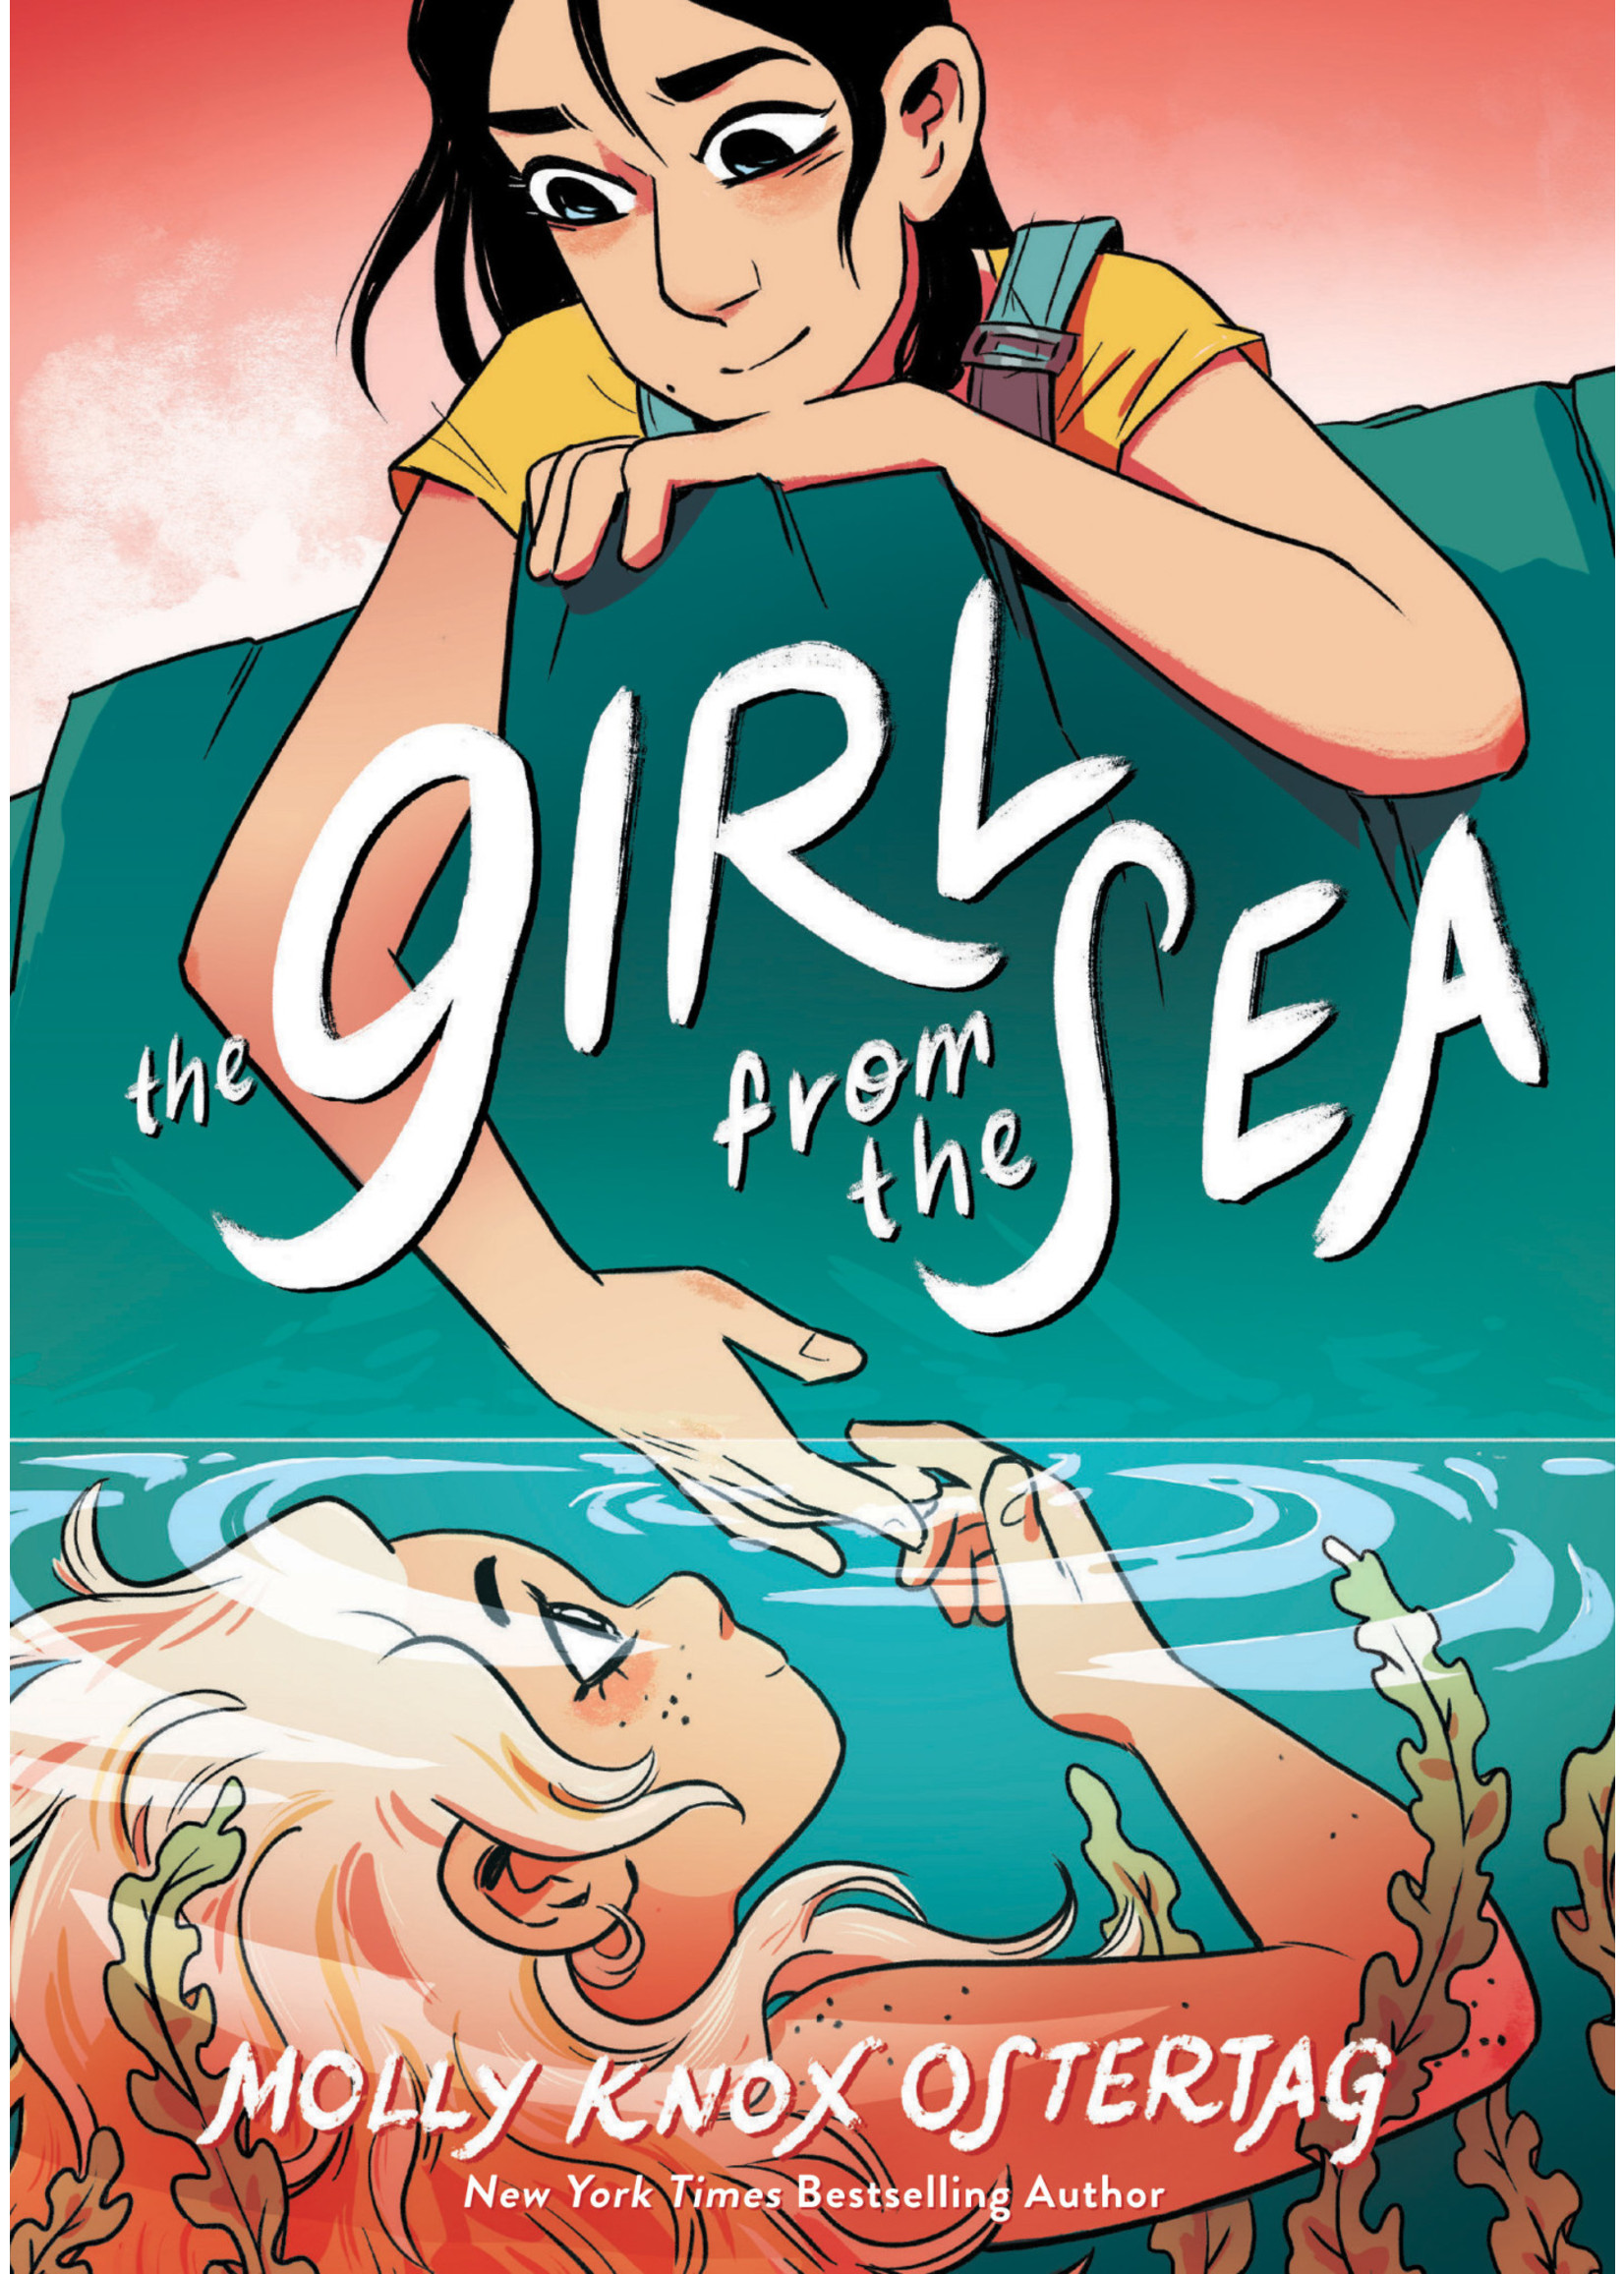 The Girl from the Sea by Molly Ostertag